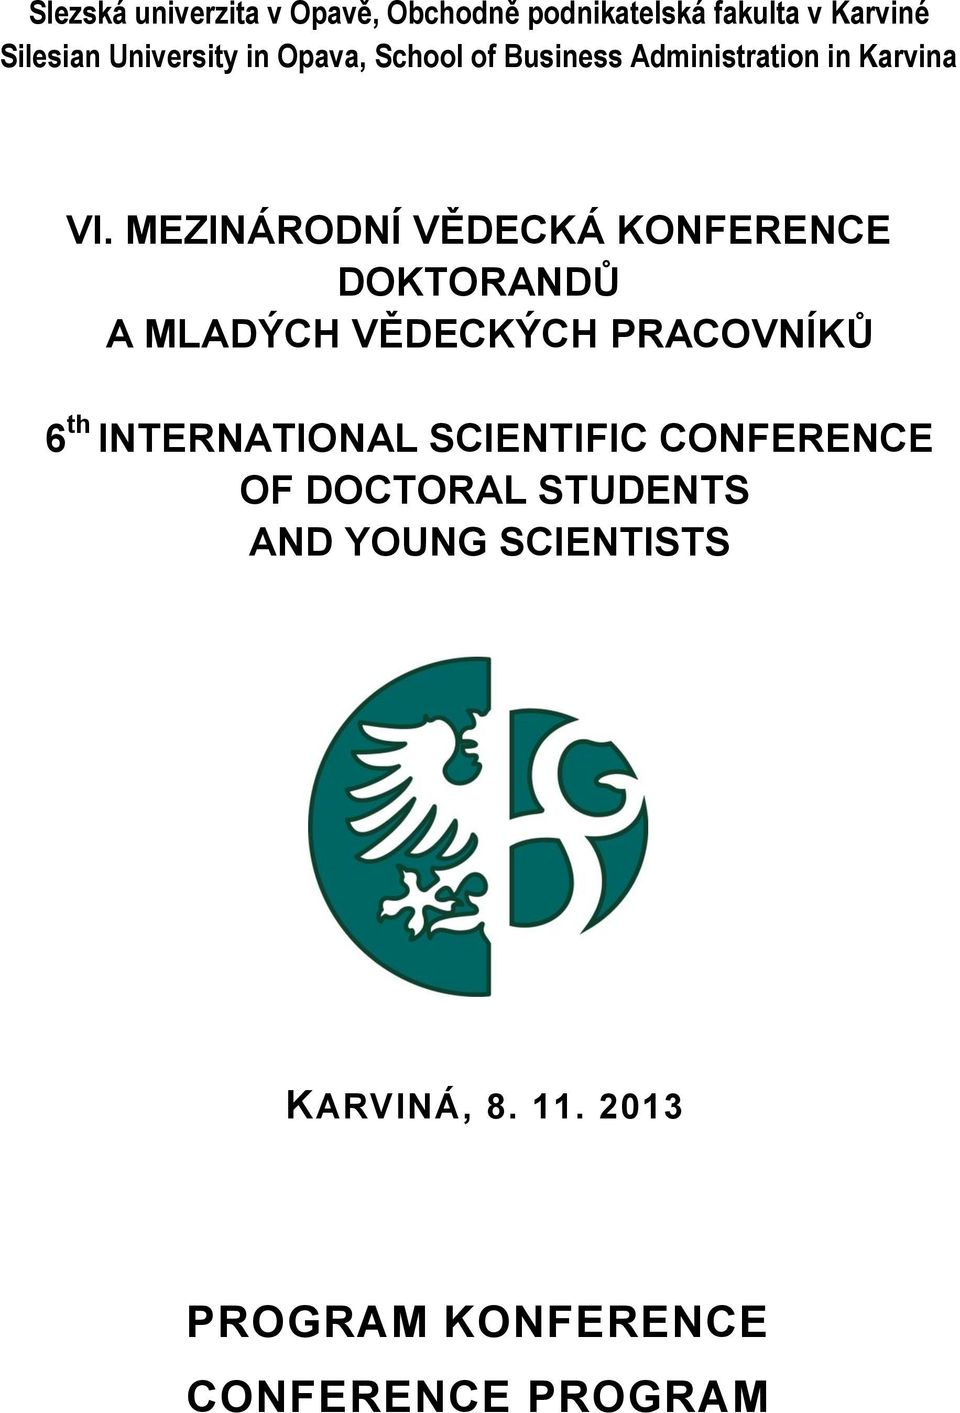 SCIENTIFIC CONFERENCE OF DOCTORAL STUDENTS AND YOUNG